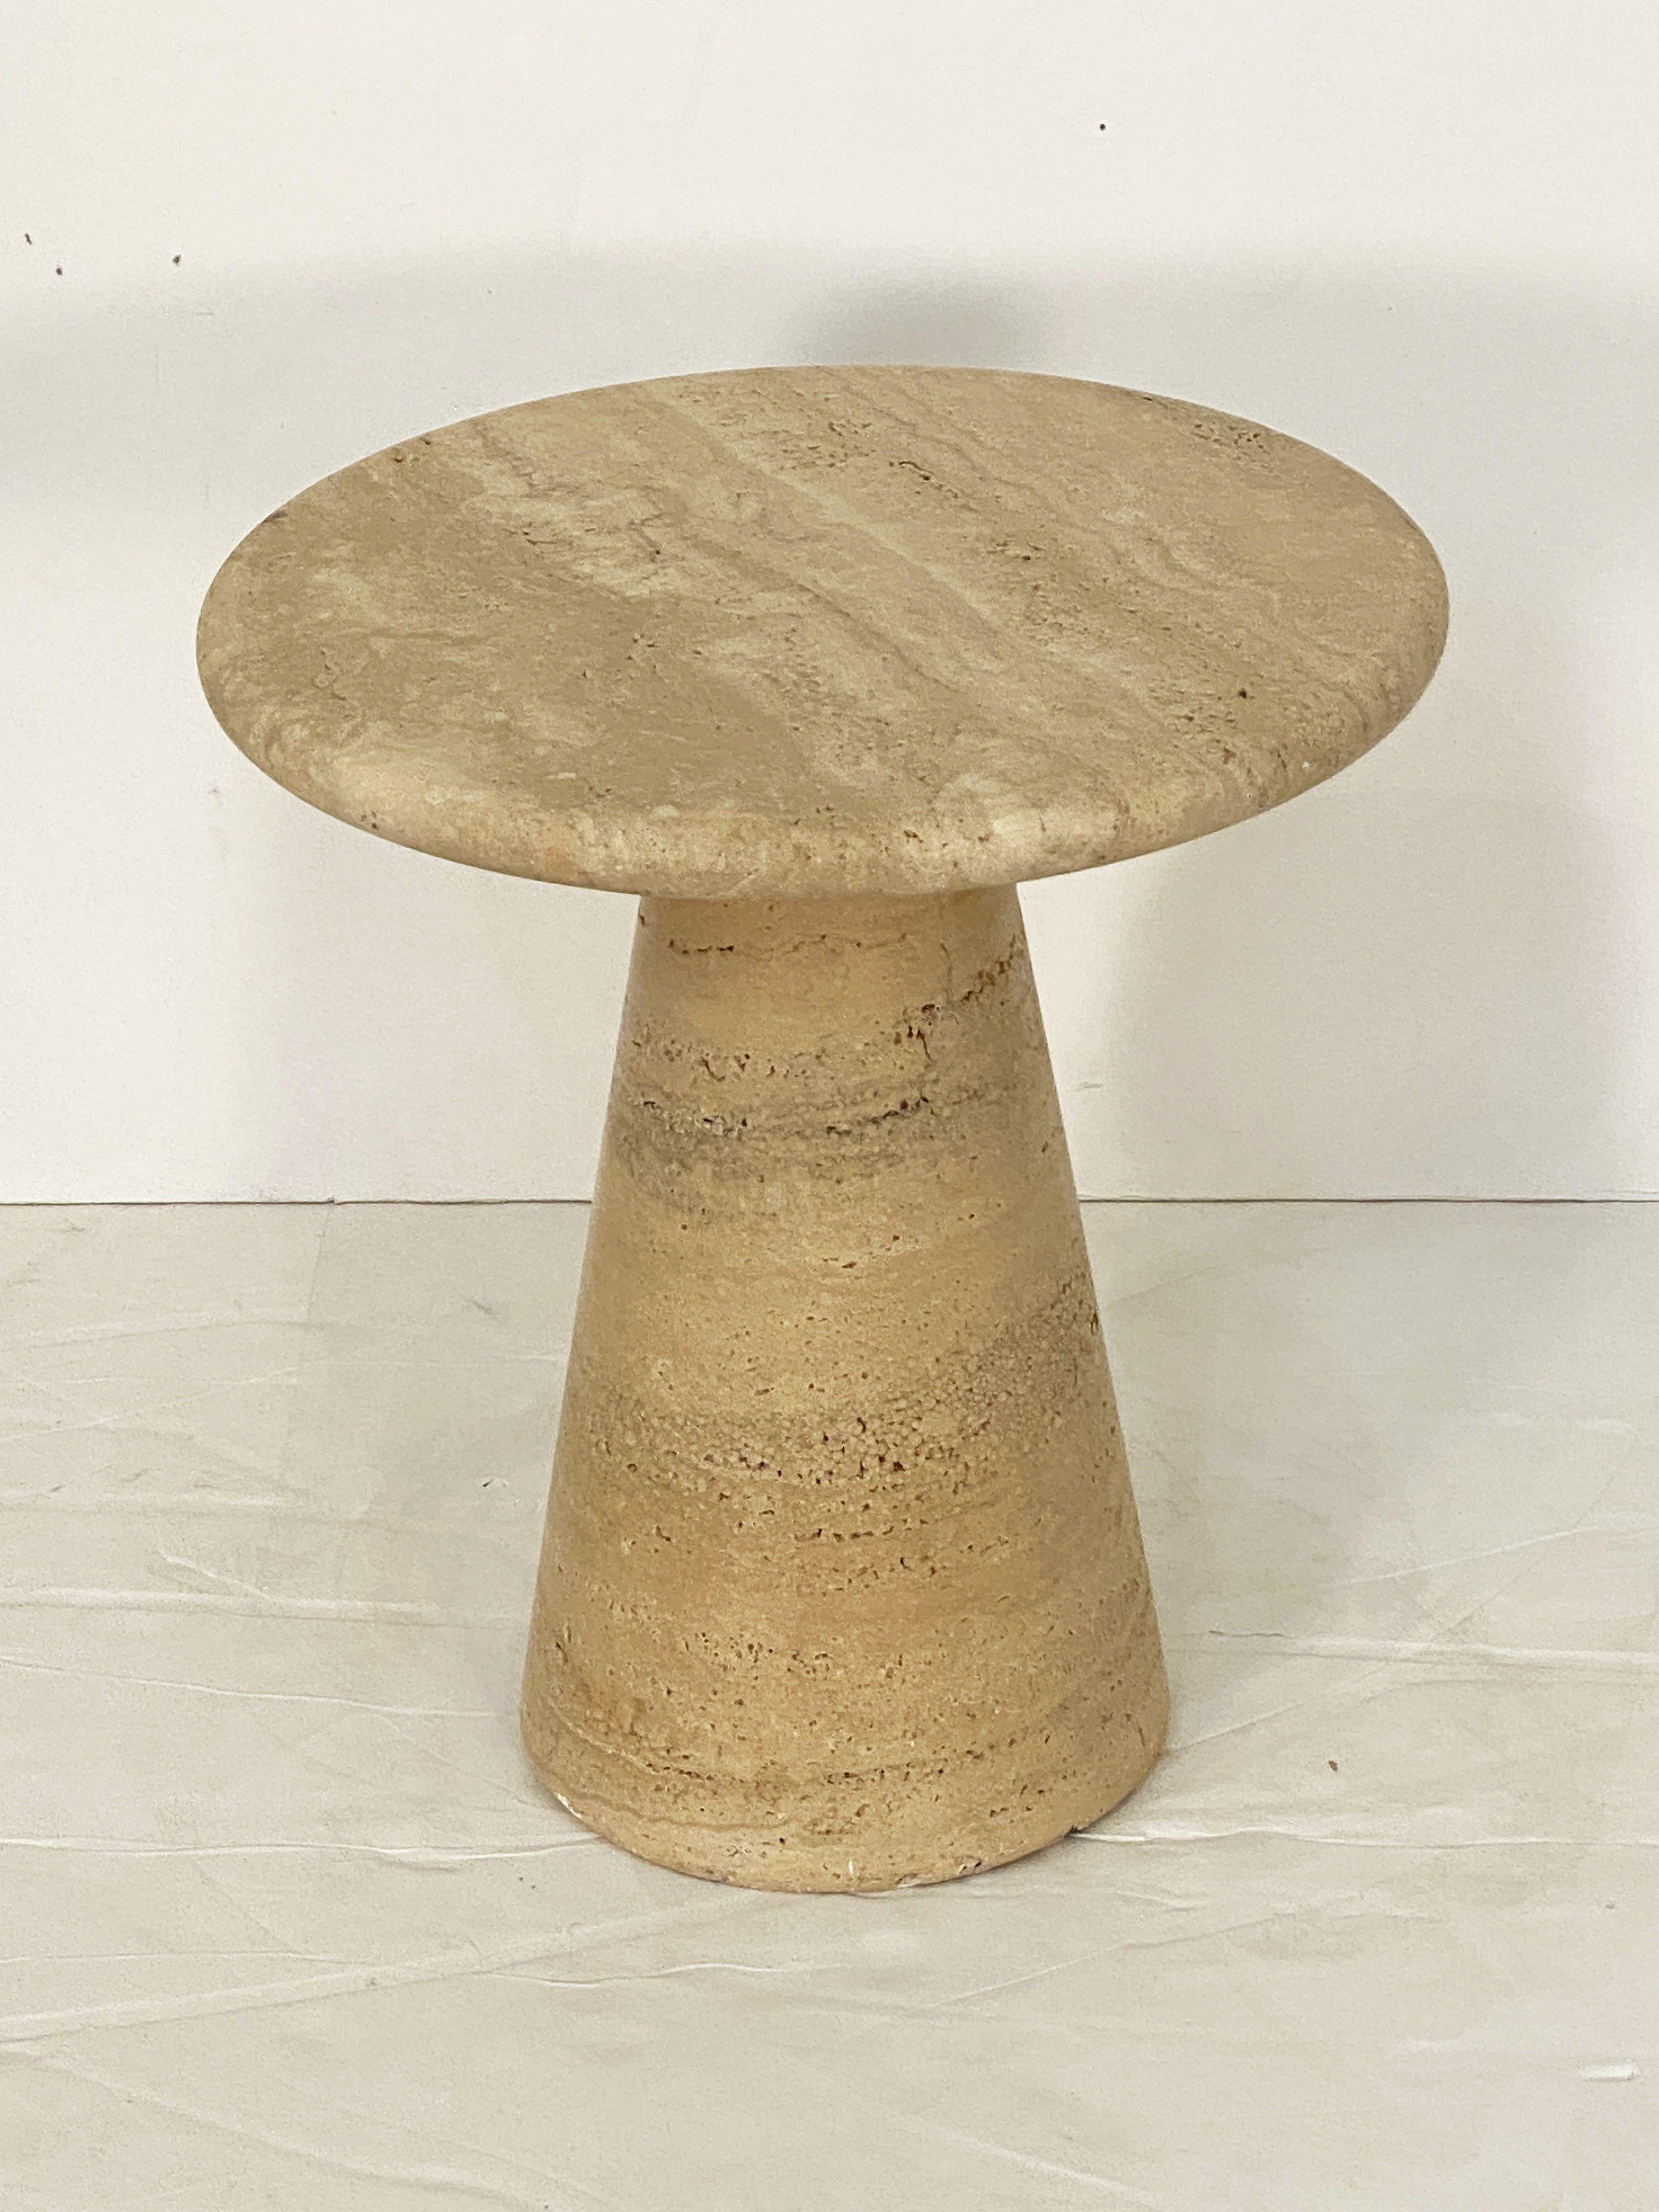 Modernist Conical Table of Travertine Stone from Italy (Four Available) For Sale 1